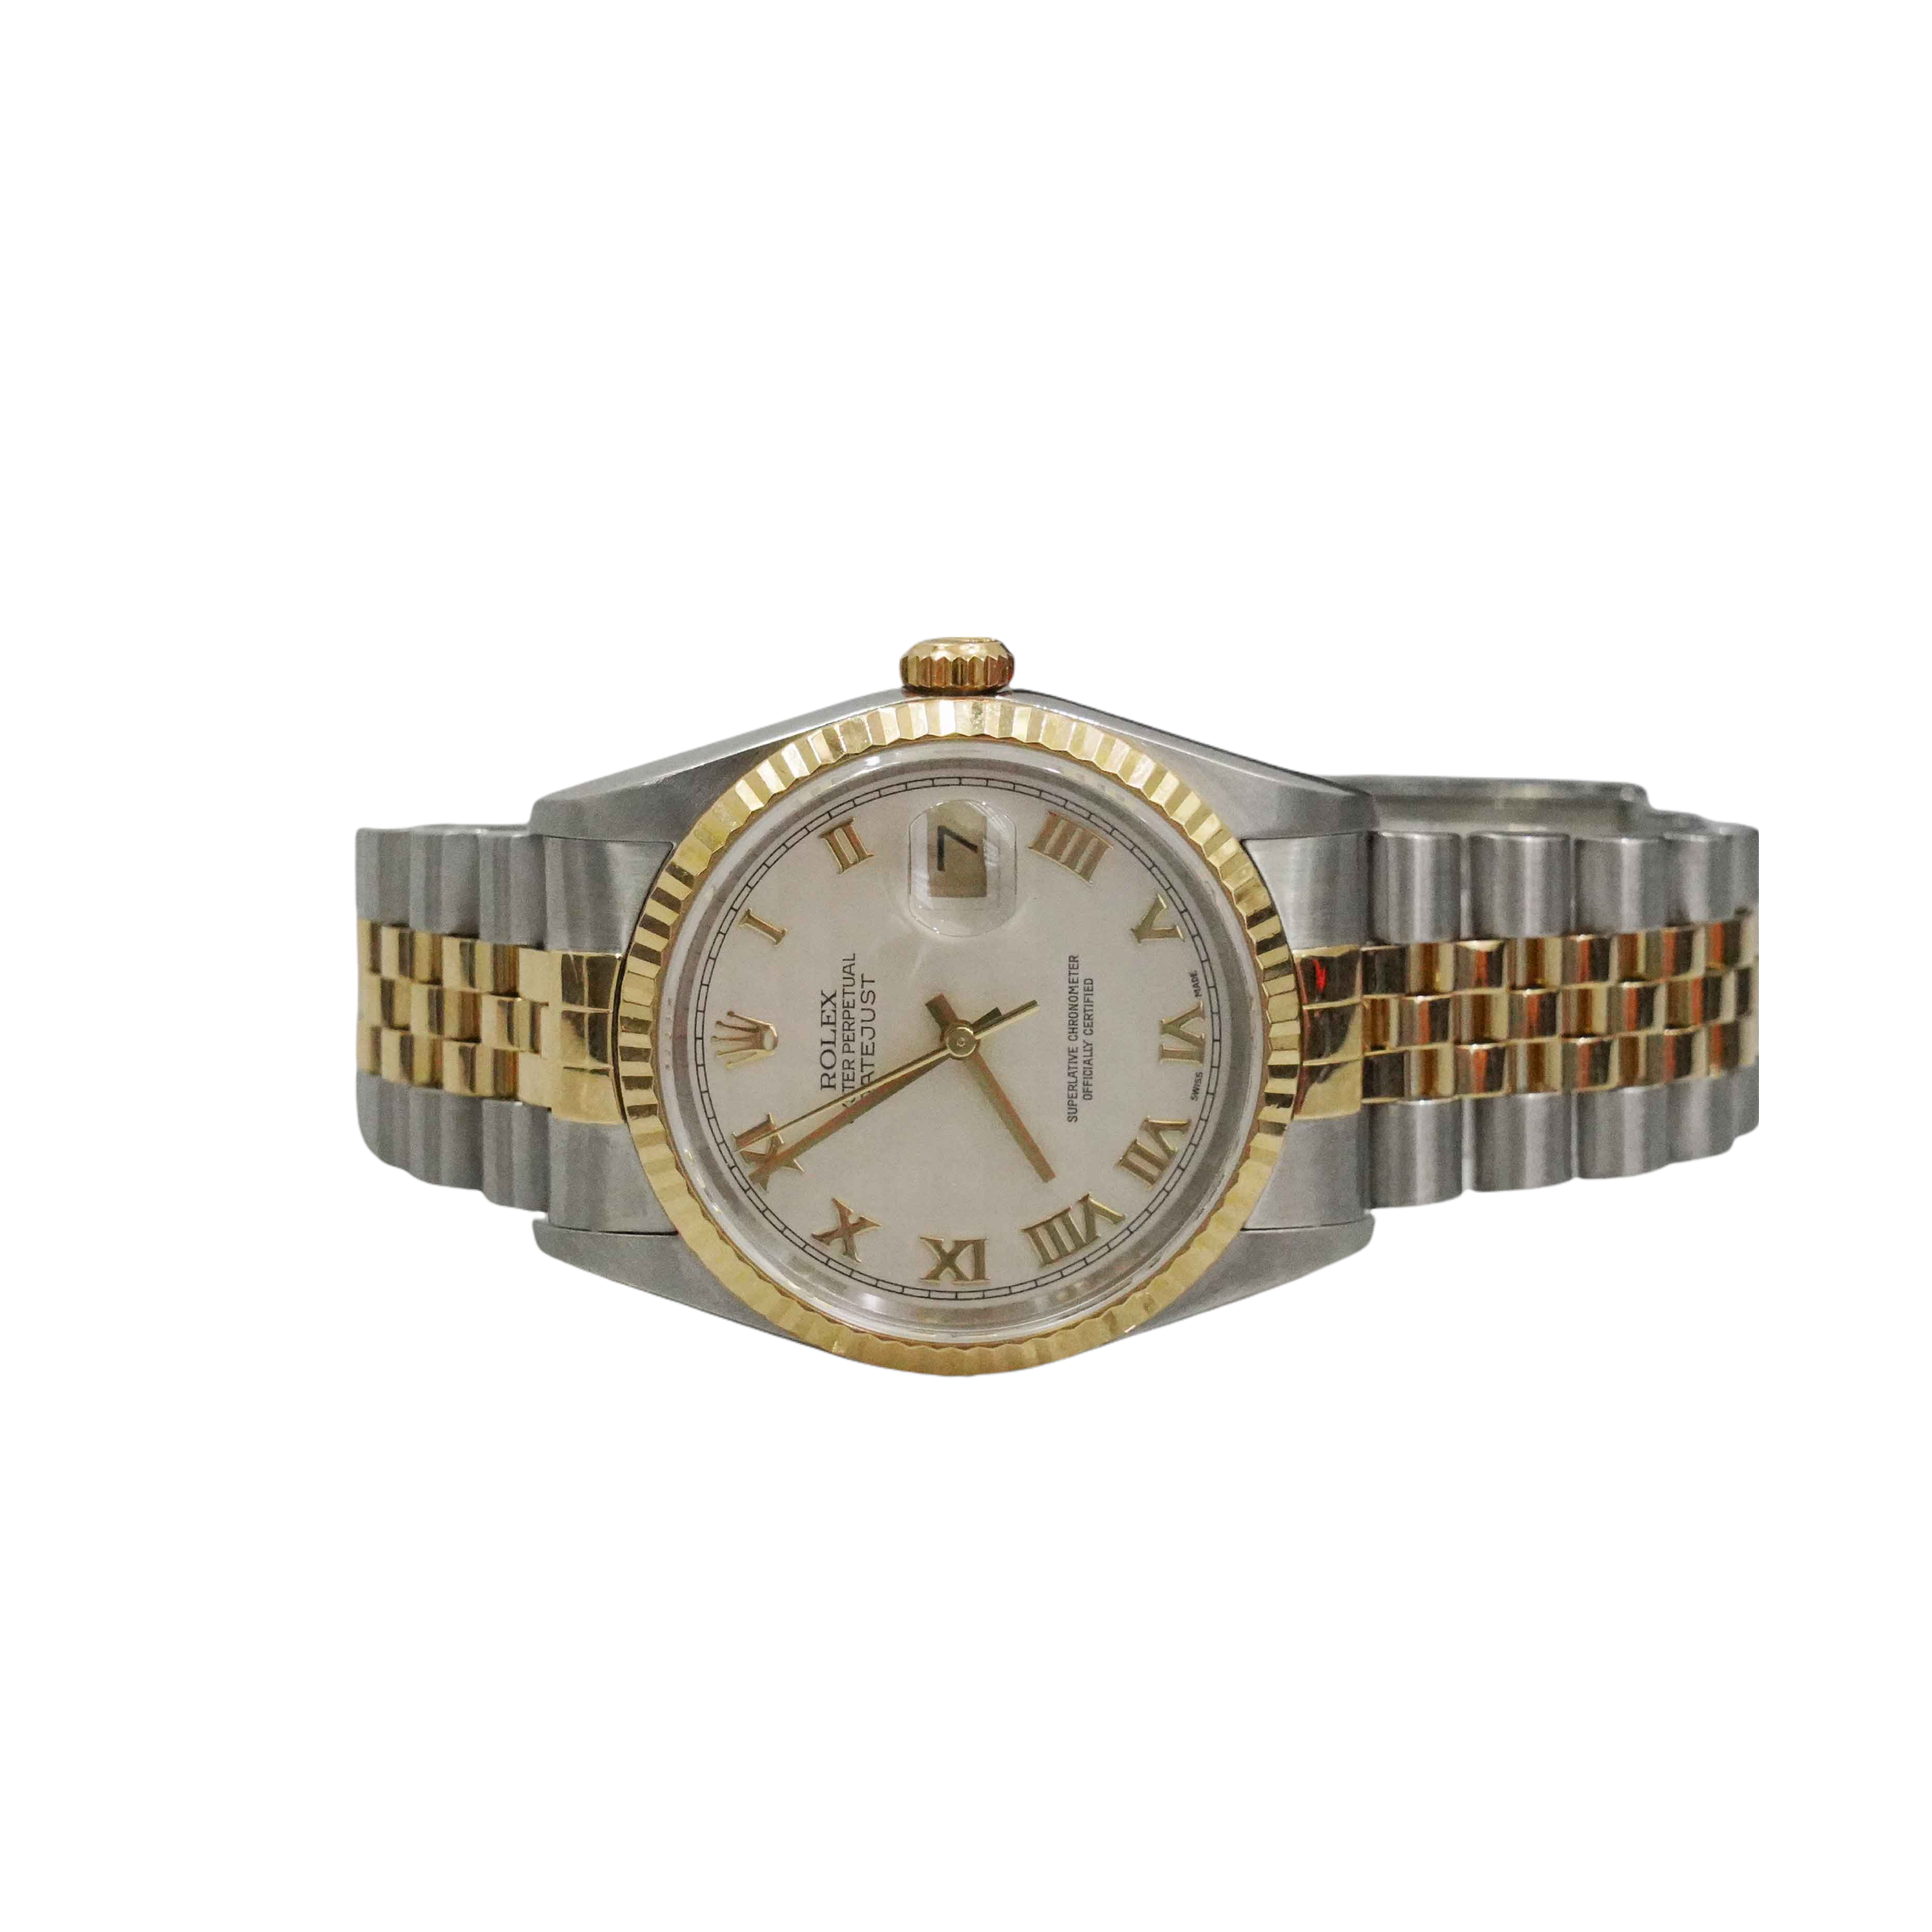 Rolex Date-just 36mm Two Tone Watch 16233